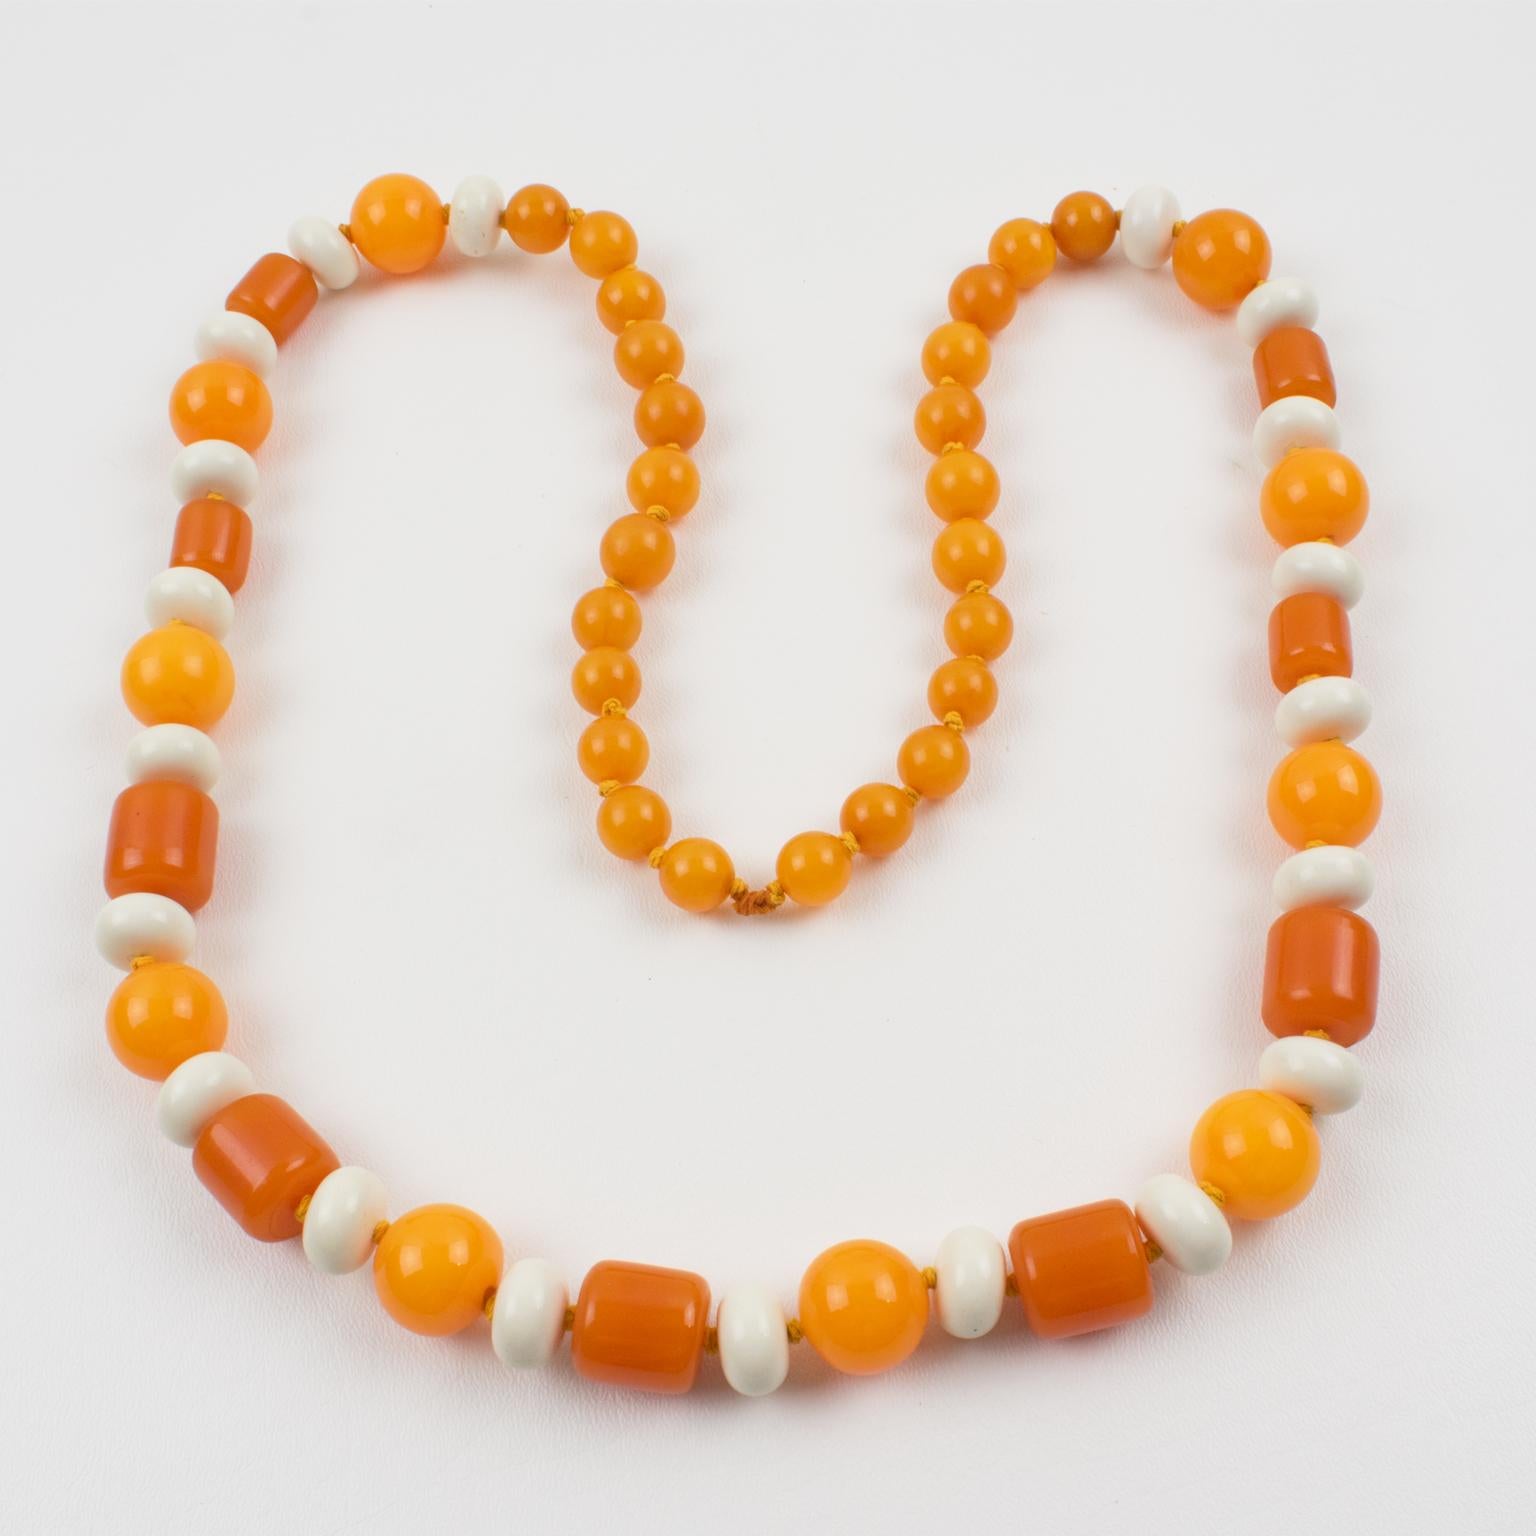 Women's Bakelite and Lucite Long Necklace Orange and White Colors For Sale